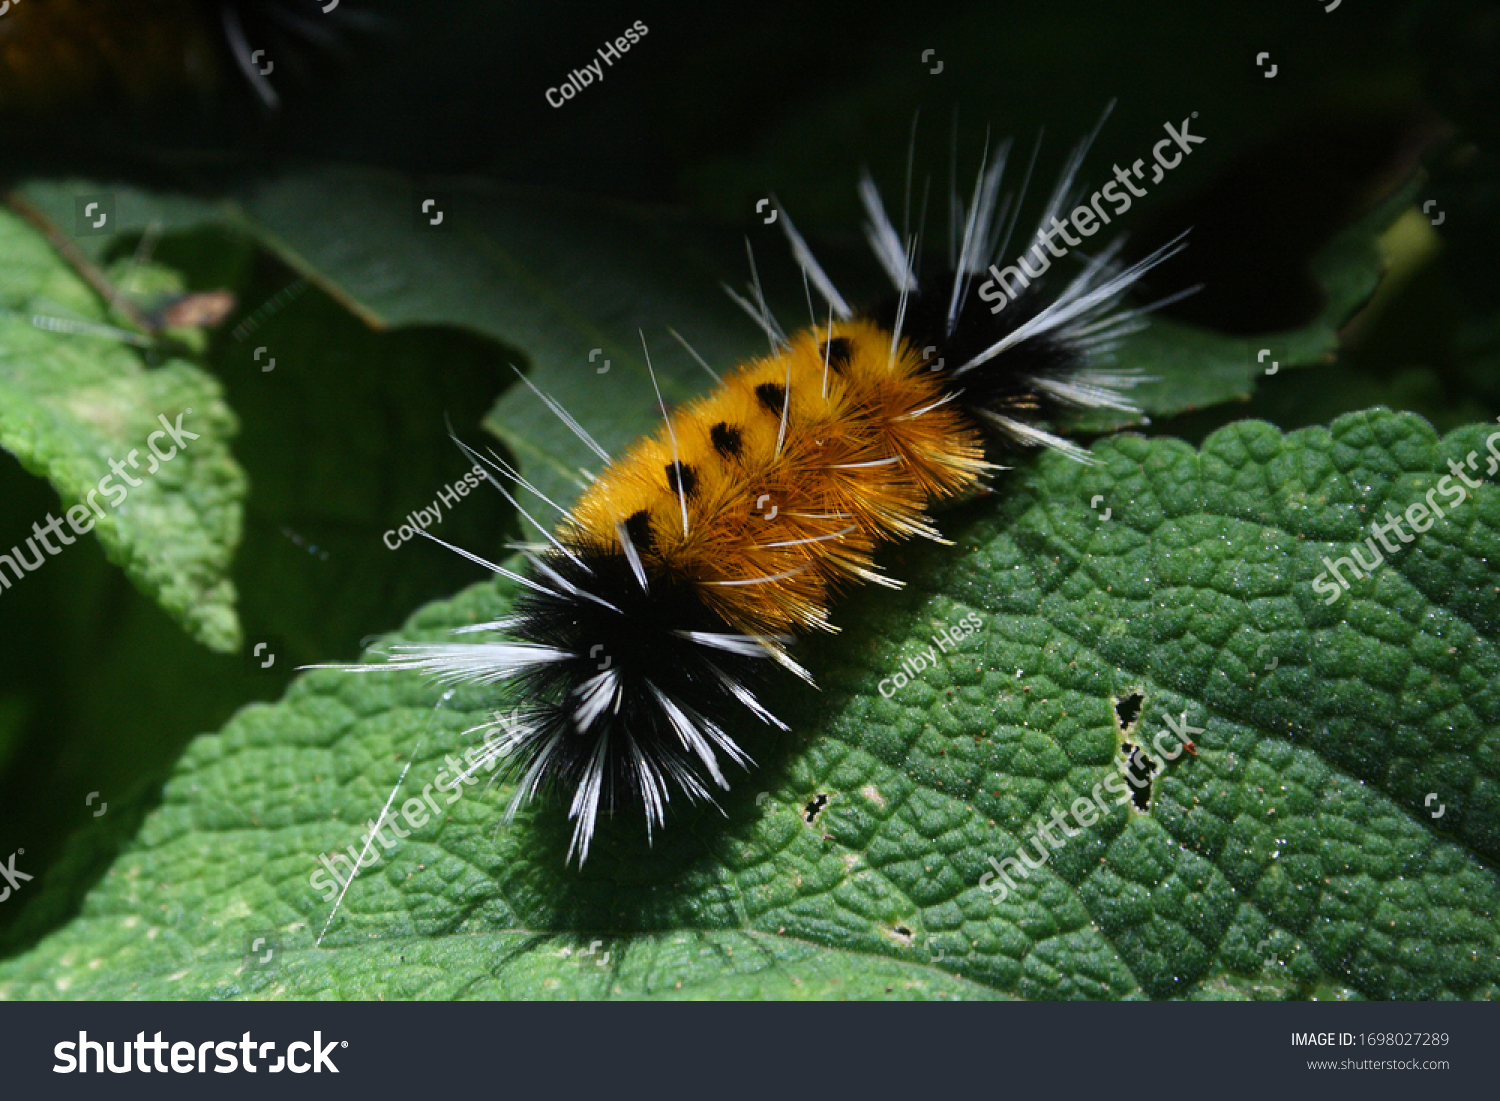 A fuzzy, orange and black tiger moth caterpillar (Lophocampa maculata) forages on leaves in the temperate rainforest of the Pacific Northwest. #1698027289